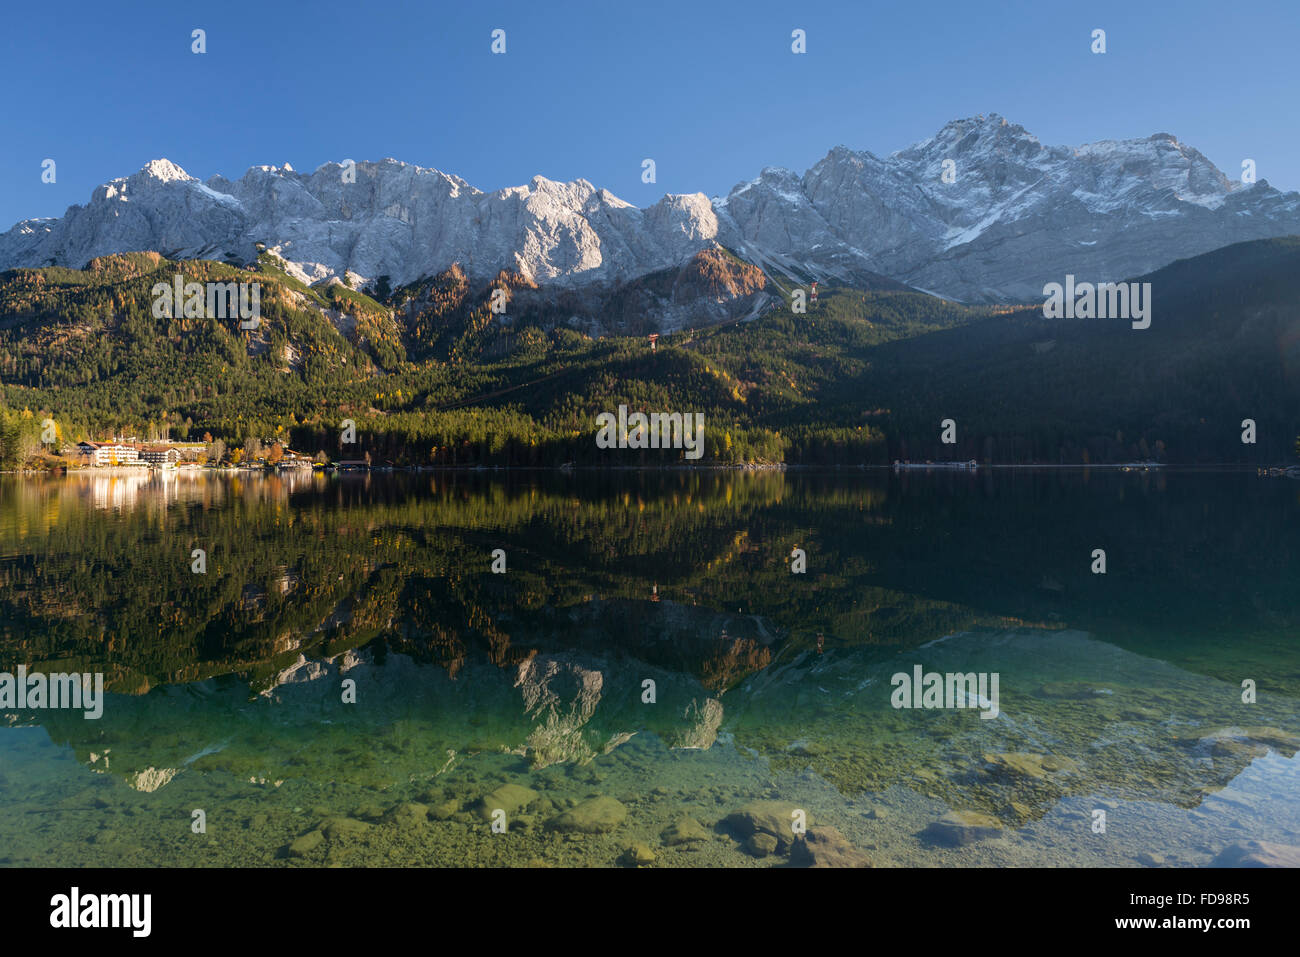 Lake Eibsee before Wetterstein mountain range and mount Zugspitze with autumn forests and trees in warm afternoon sunlight Stock Photo